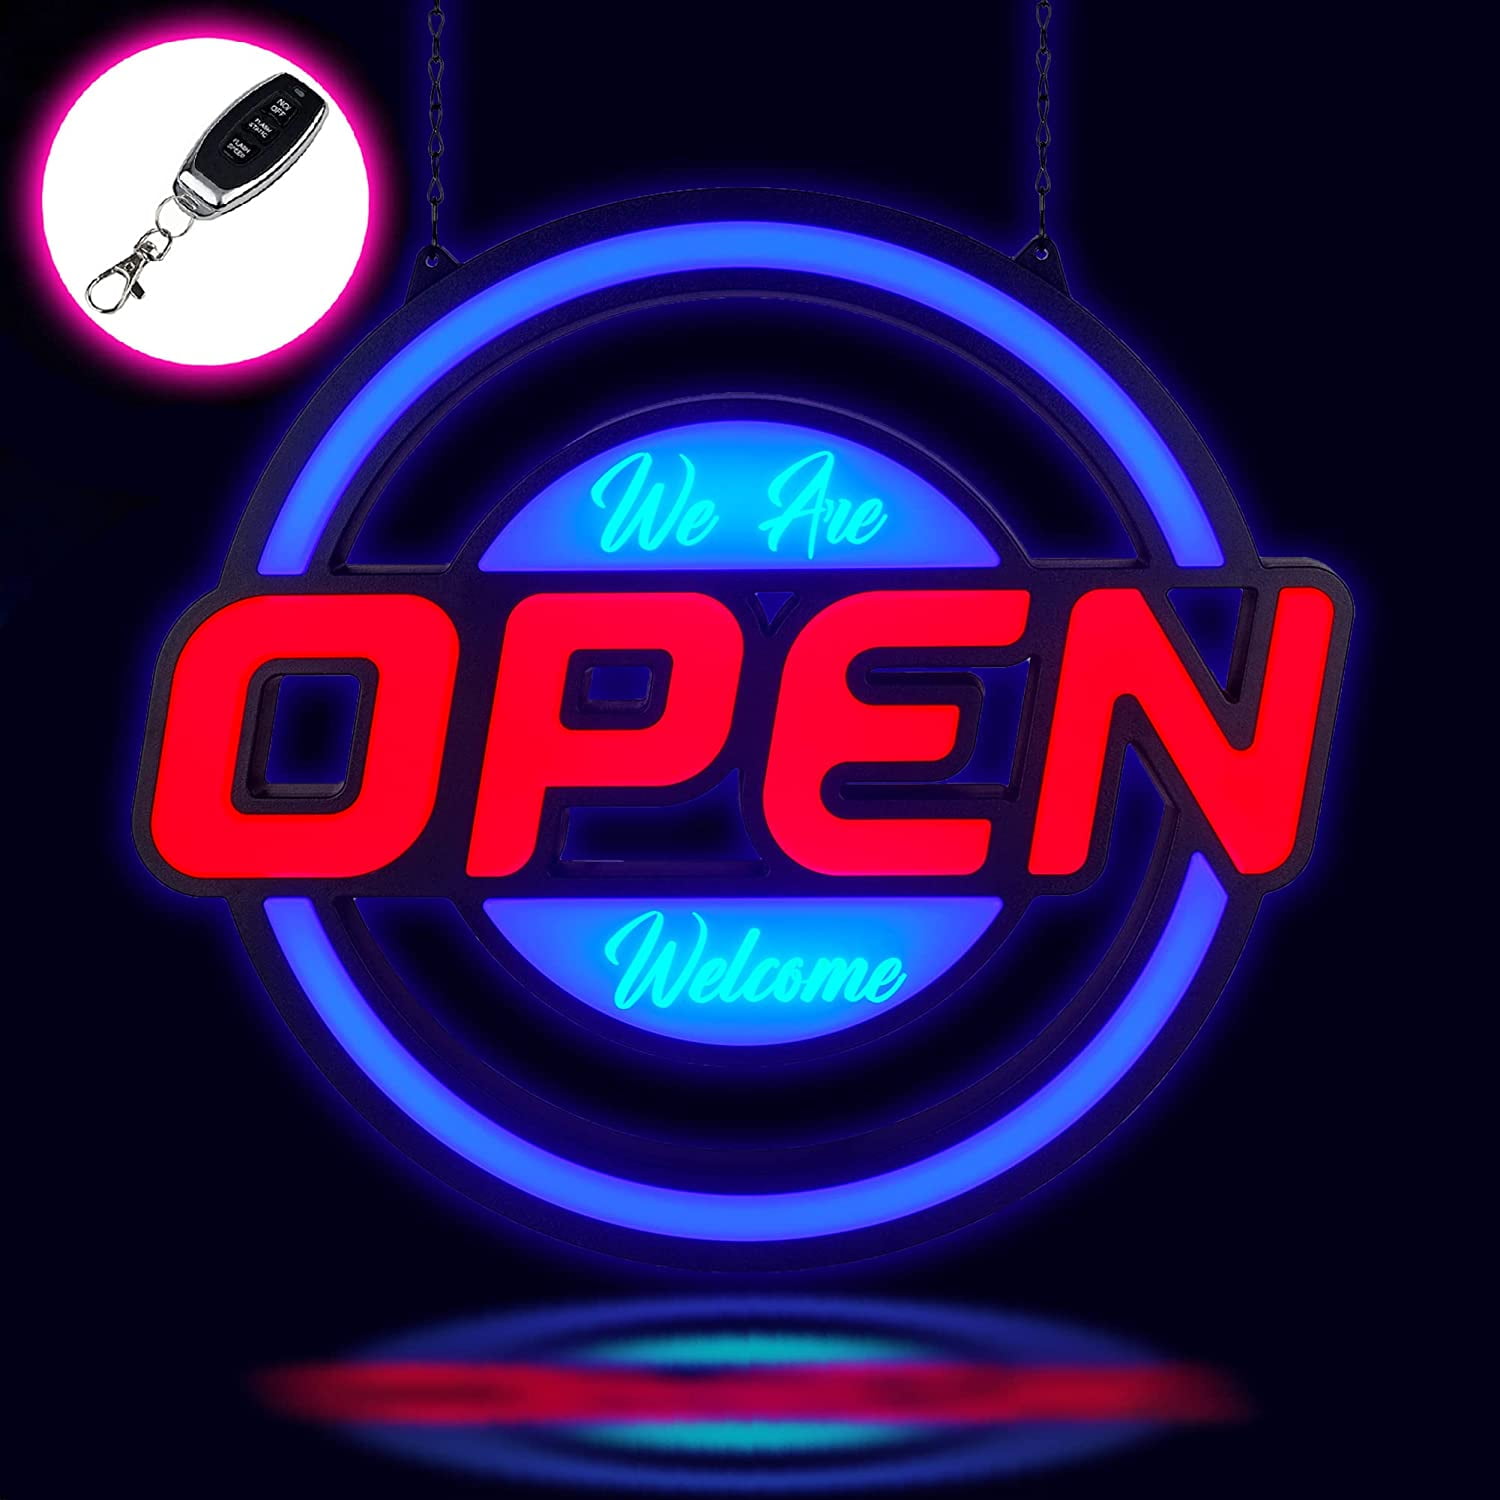 LED Open Signs for Business Store Green Open Neon Light Up Letters  Advertisement Board USB Powered O…See more LED Open Signs for Business  Store Green